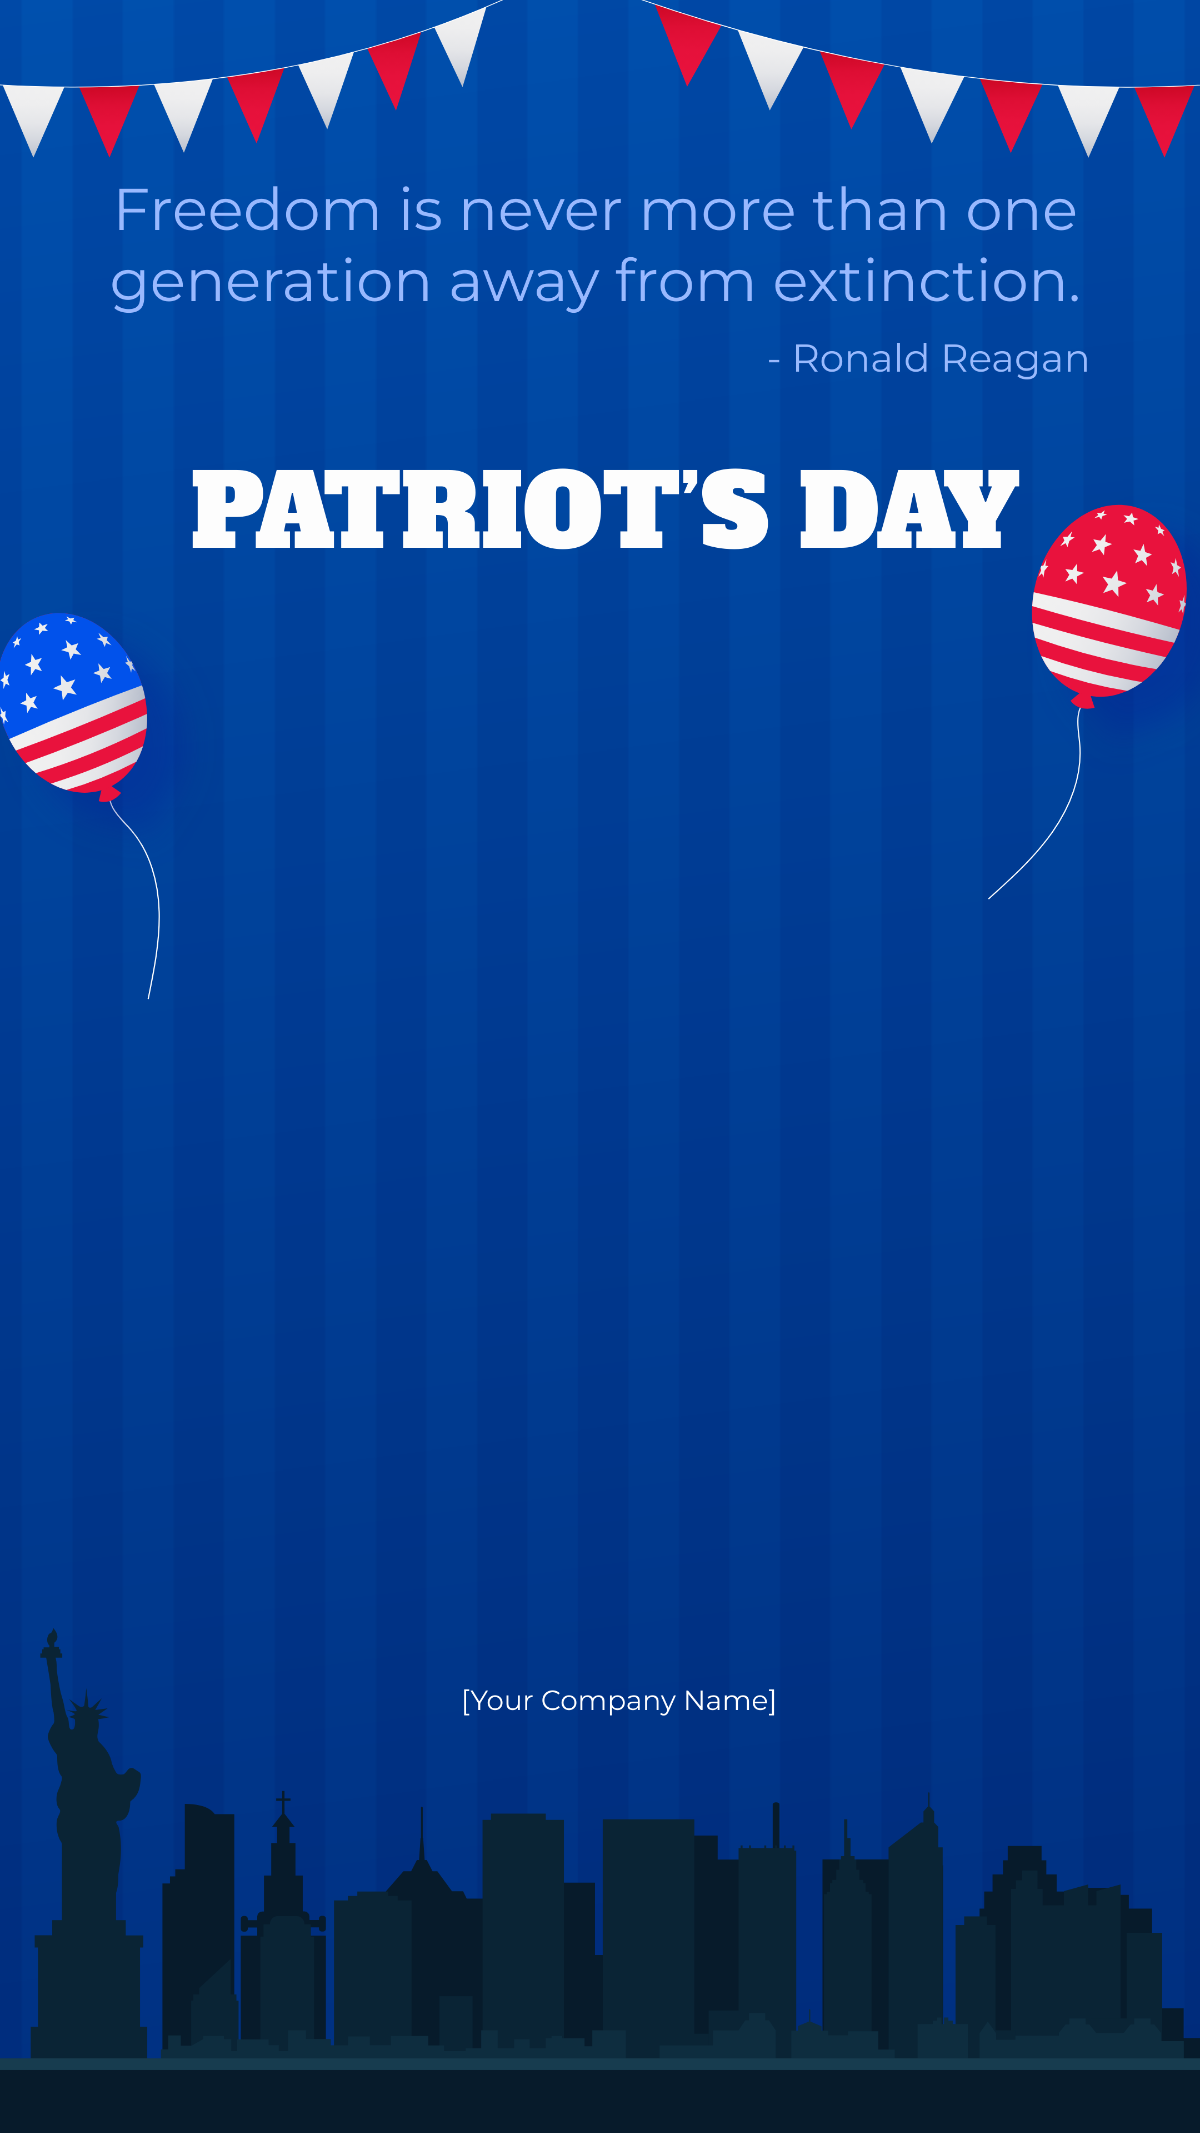 Free Patriot's Day Instagram Template